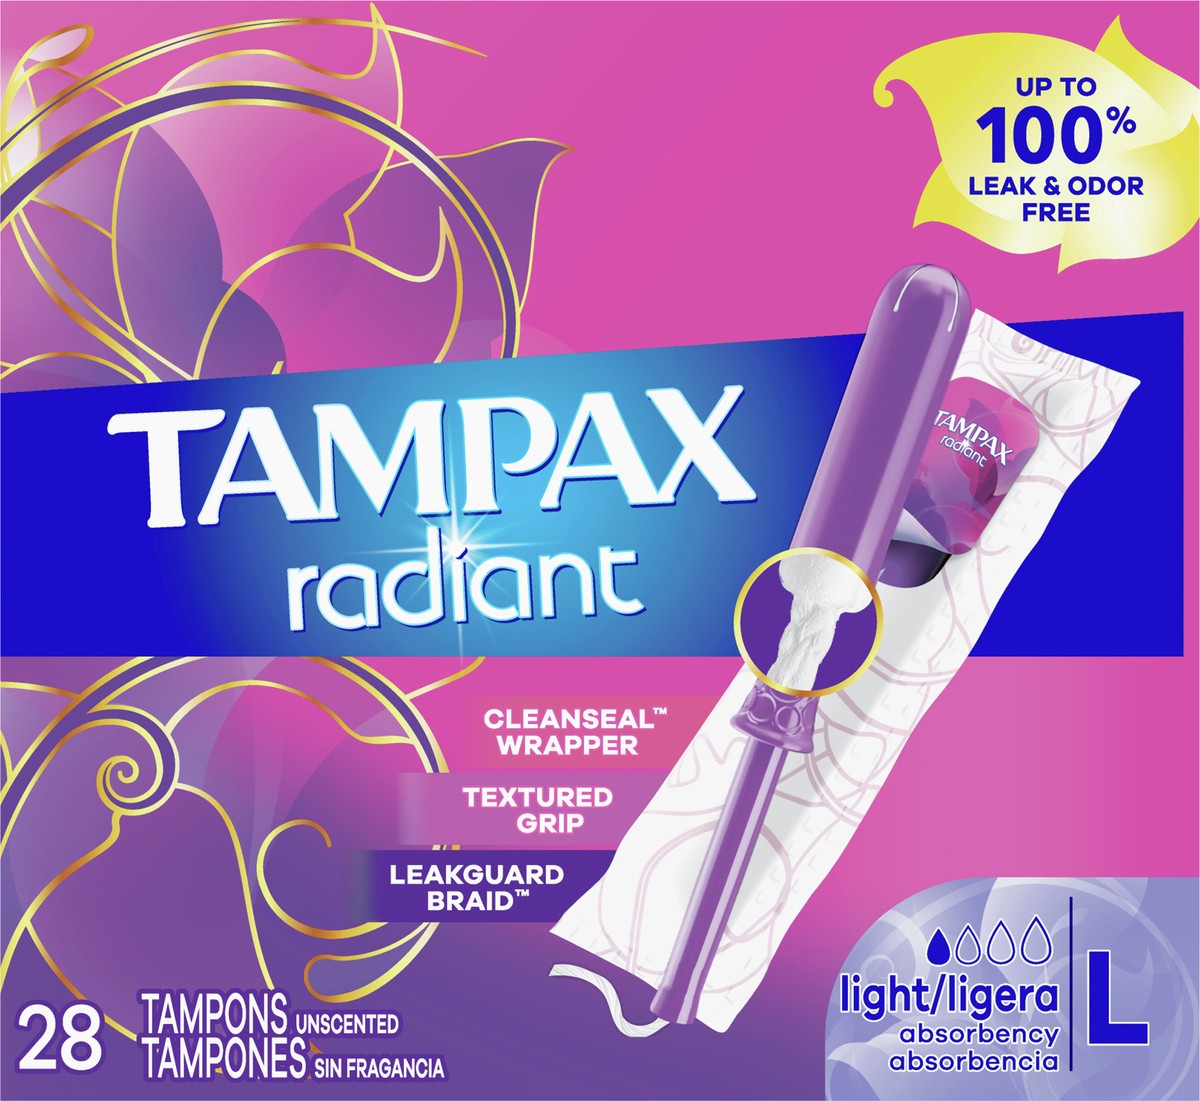 slide 6 of 6, Tampax Radiant Light Absorbency Tampons Plastic Applicator and LeakGuard Braid - Unscented - 28ct, 28 ct